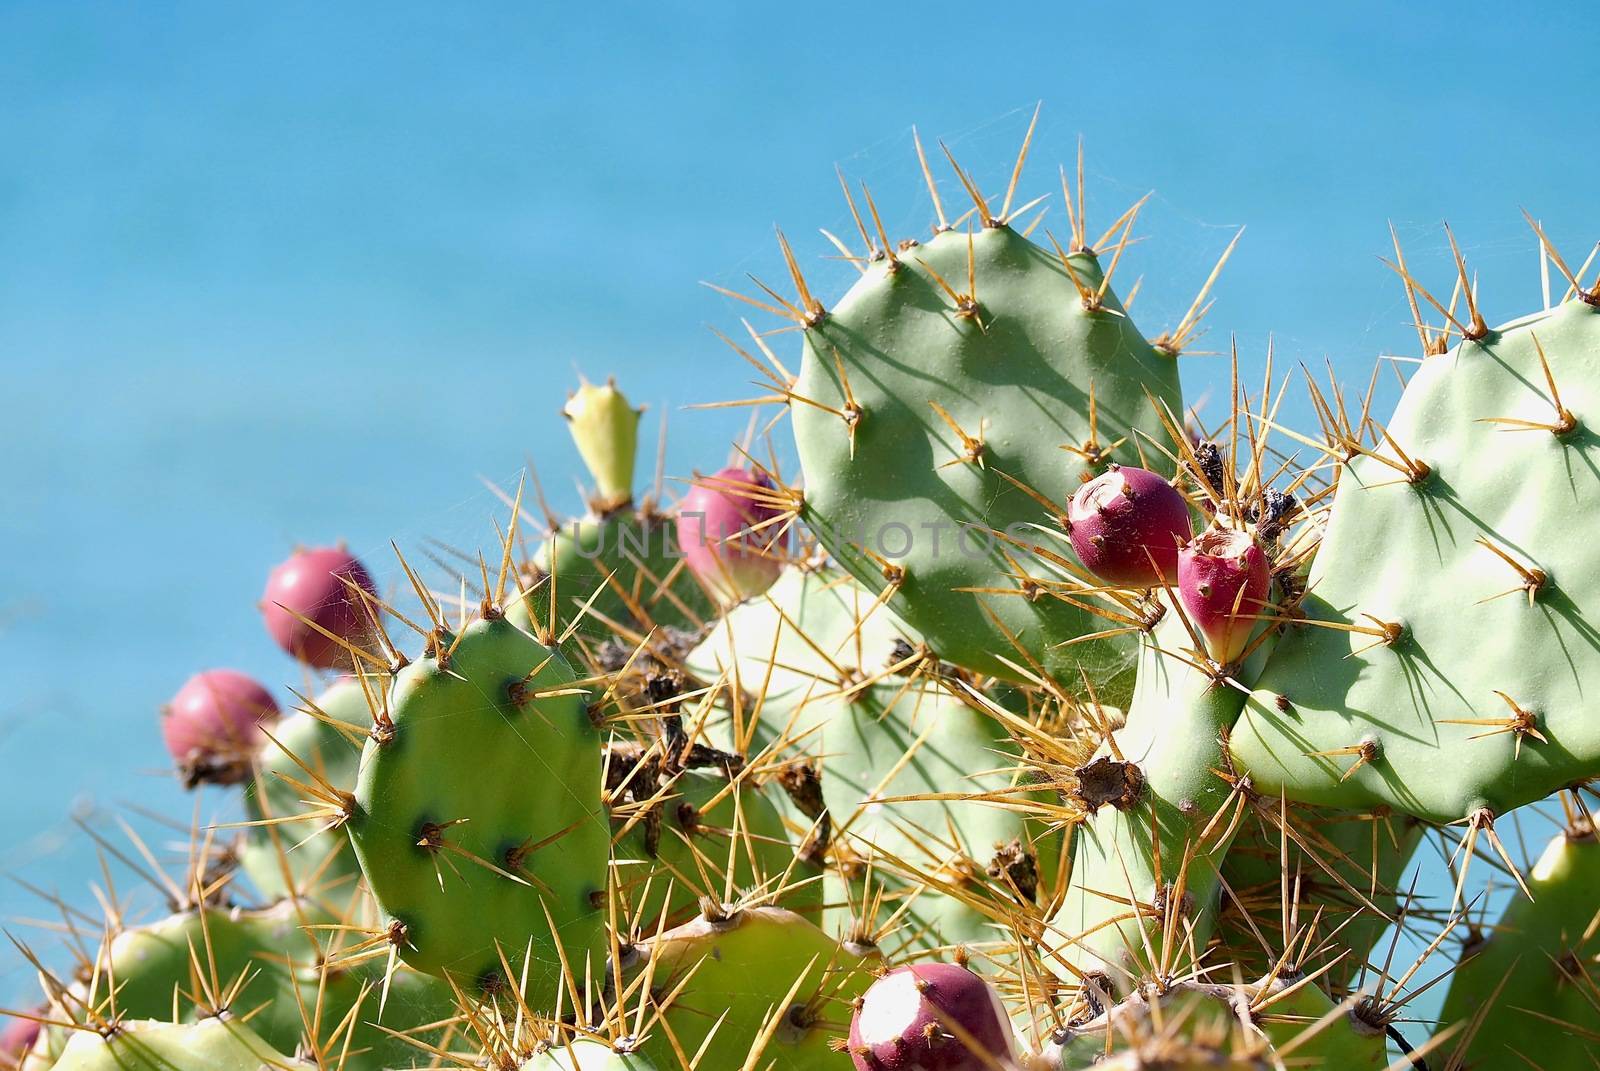 Prickly pear cactus with ripe fruits in front of blue sky by Stimmungsbilder